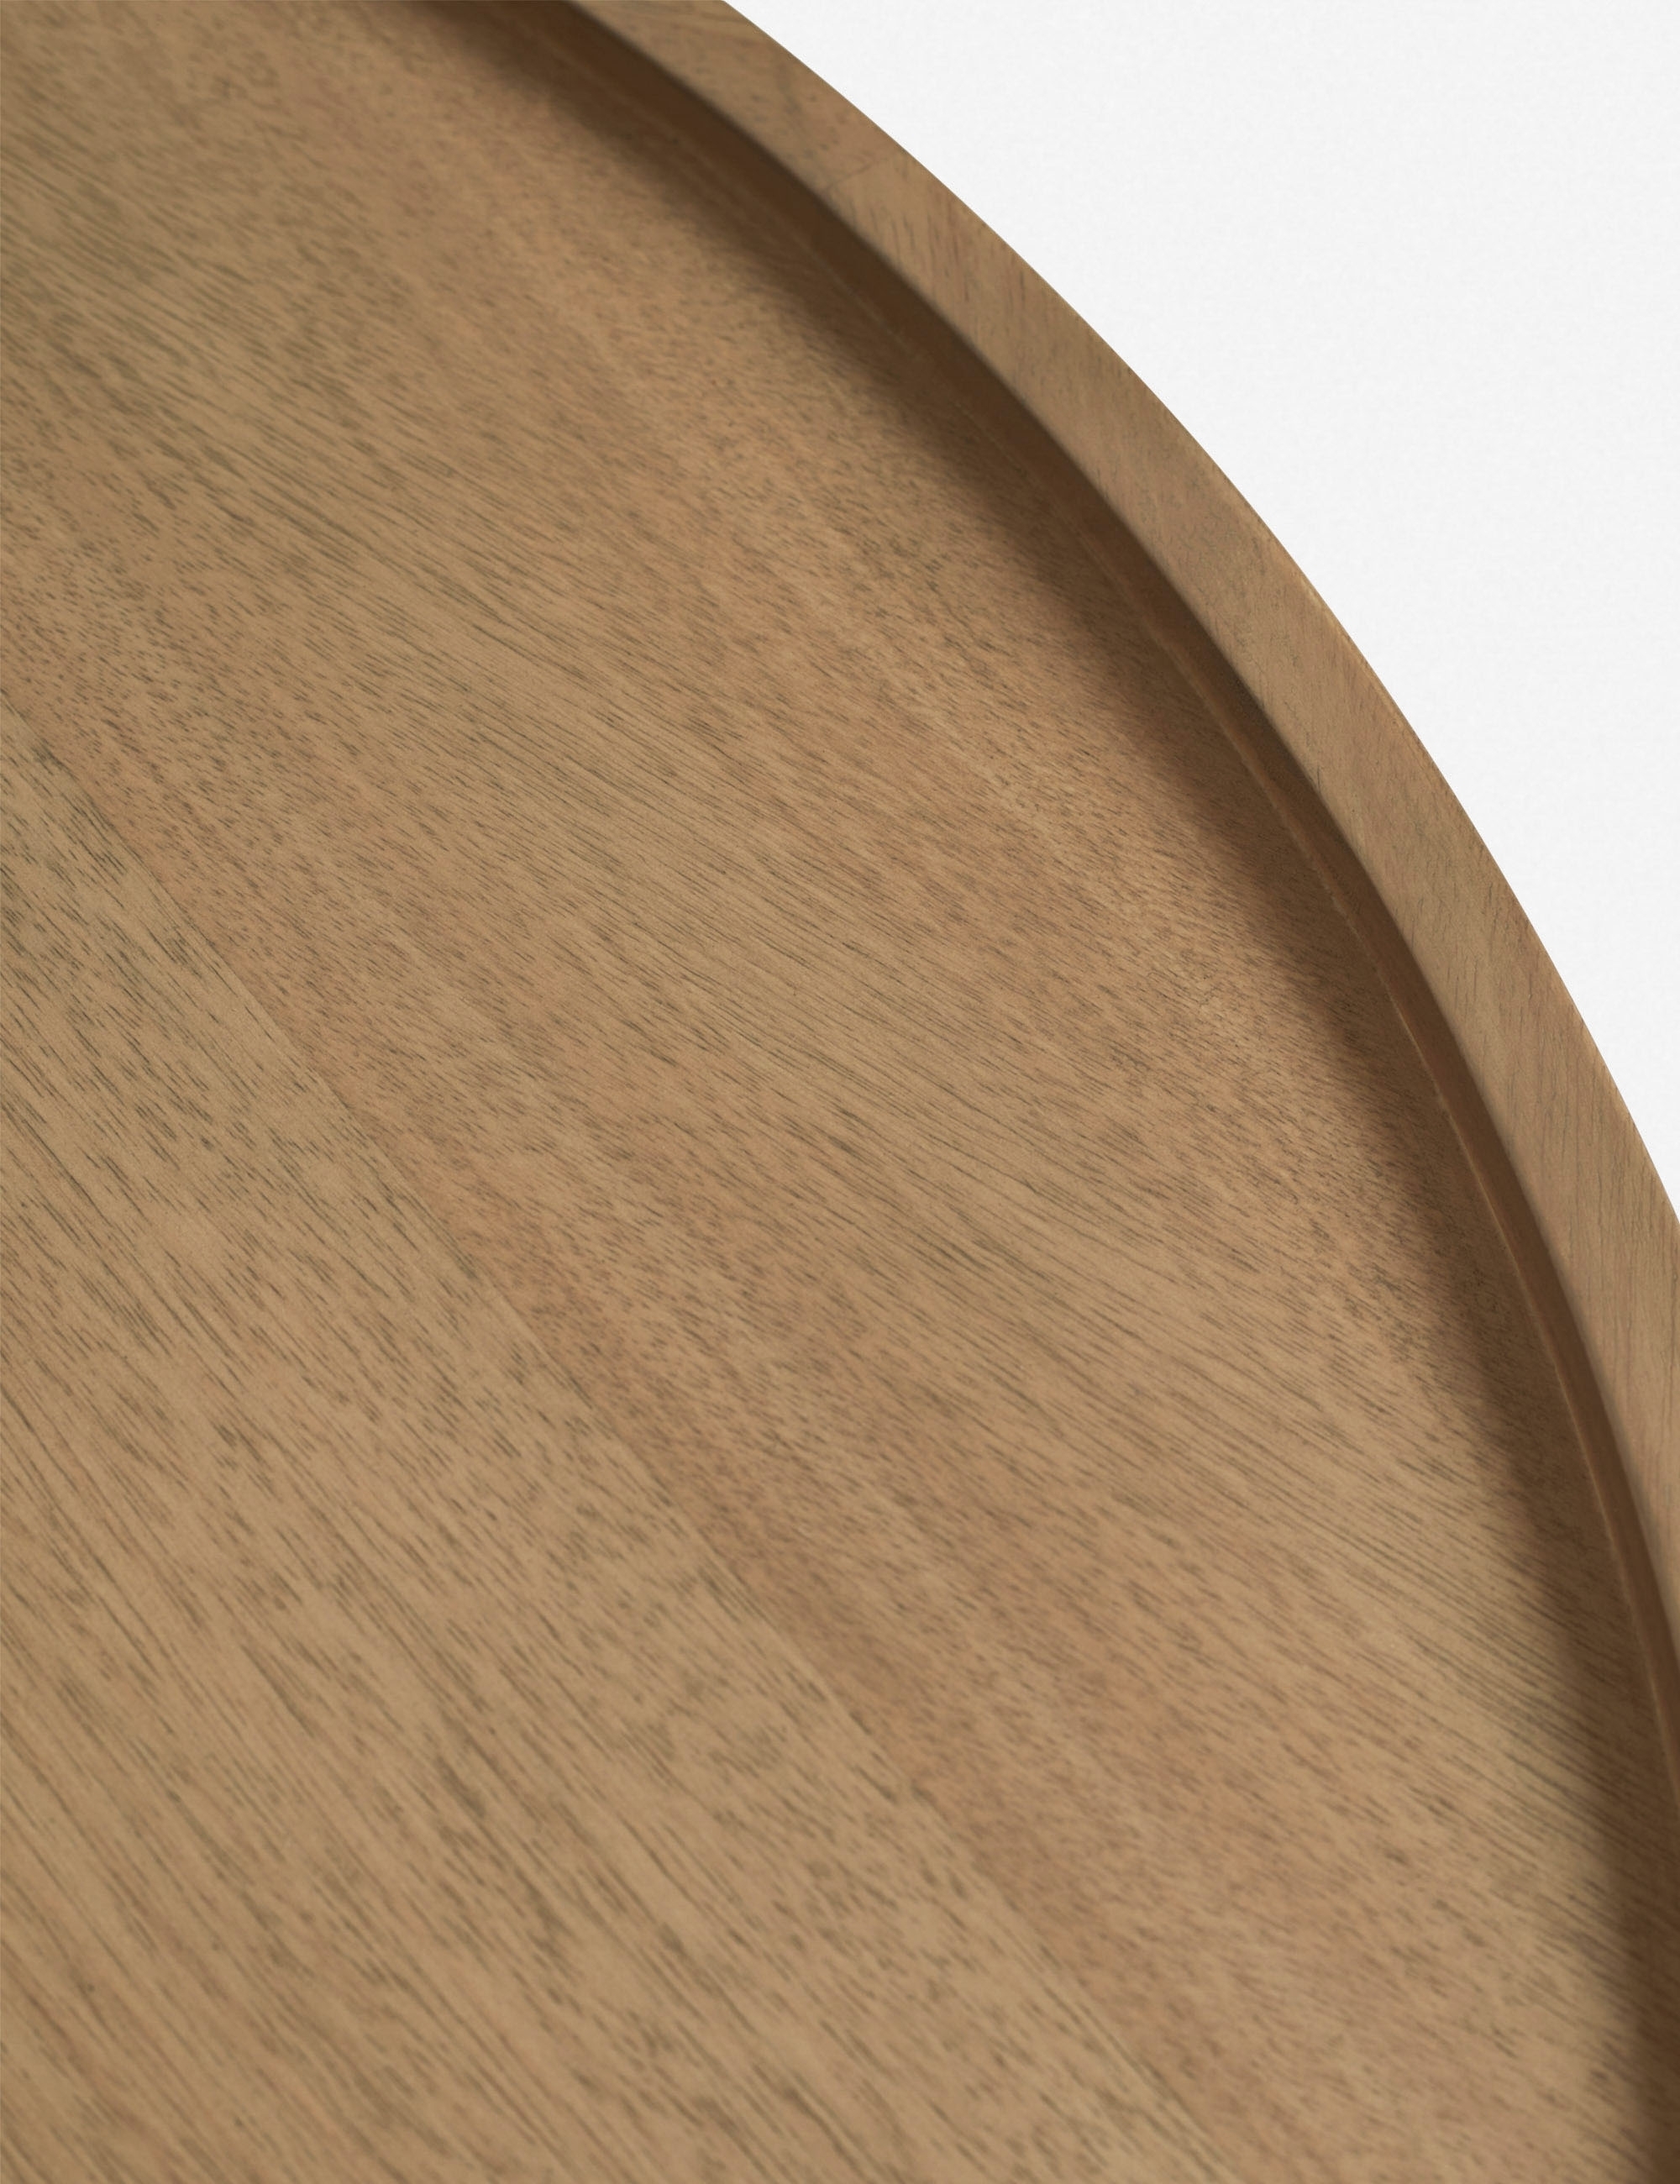 Delta Round Coffee Table - Image 1